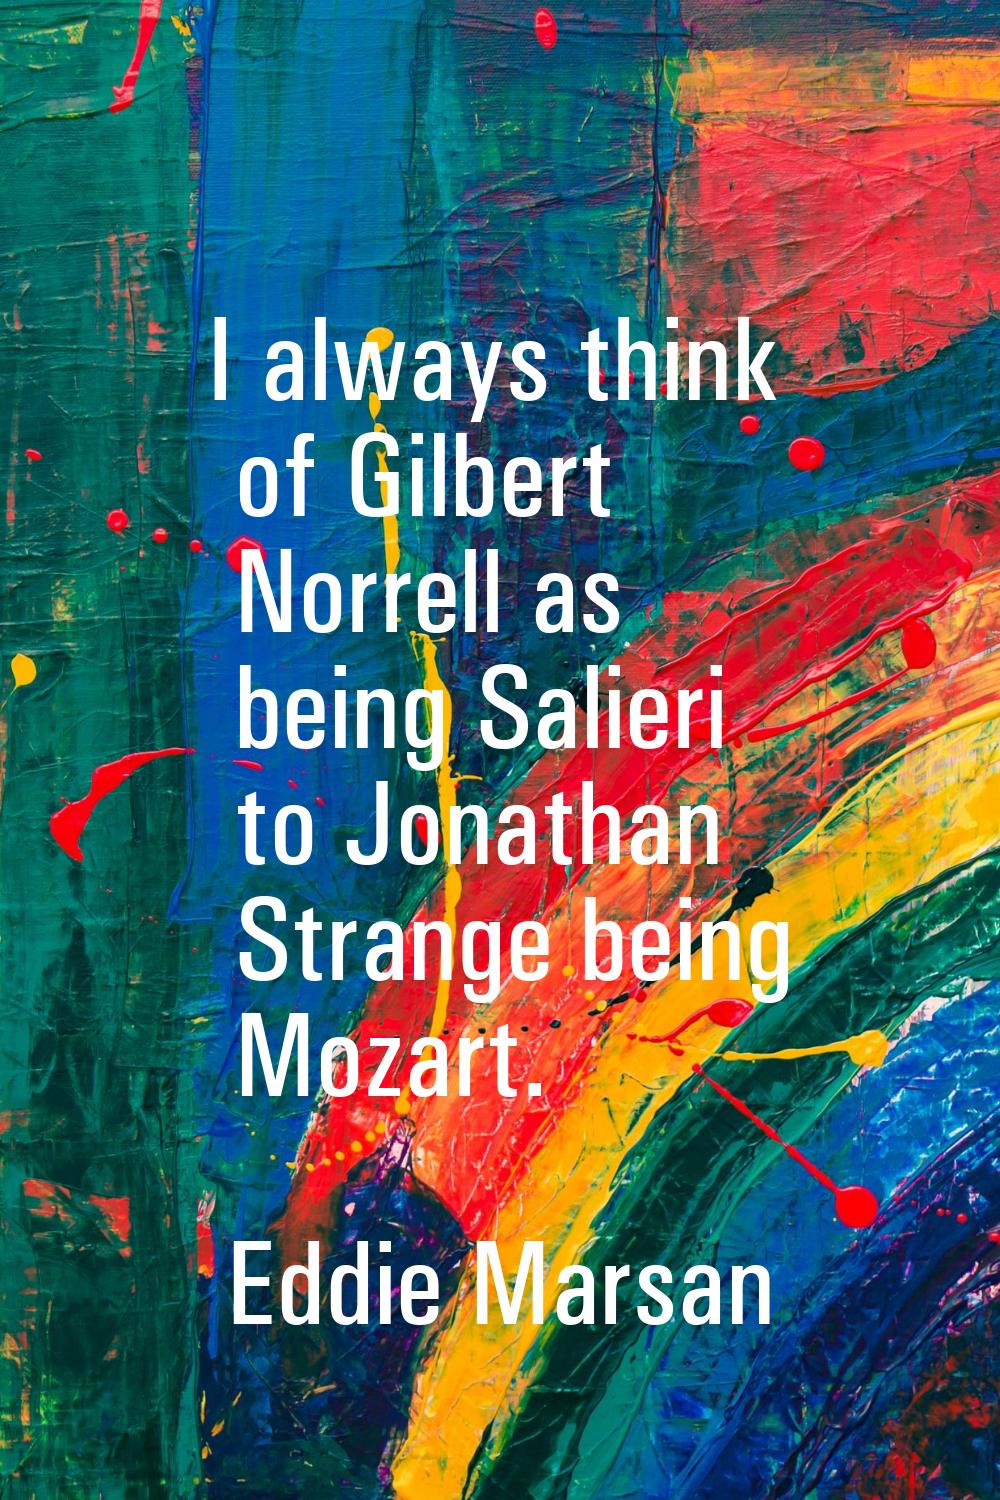 I always think of Gilbert Norrell as being Salieri to Jonathan Strange being Mozart.